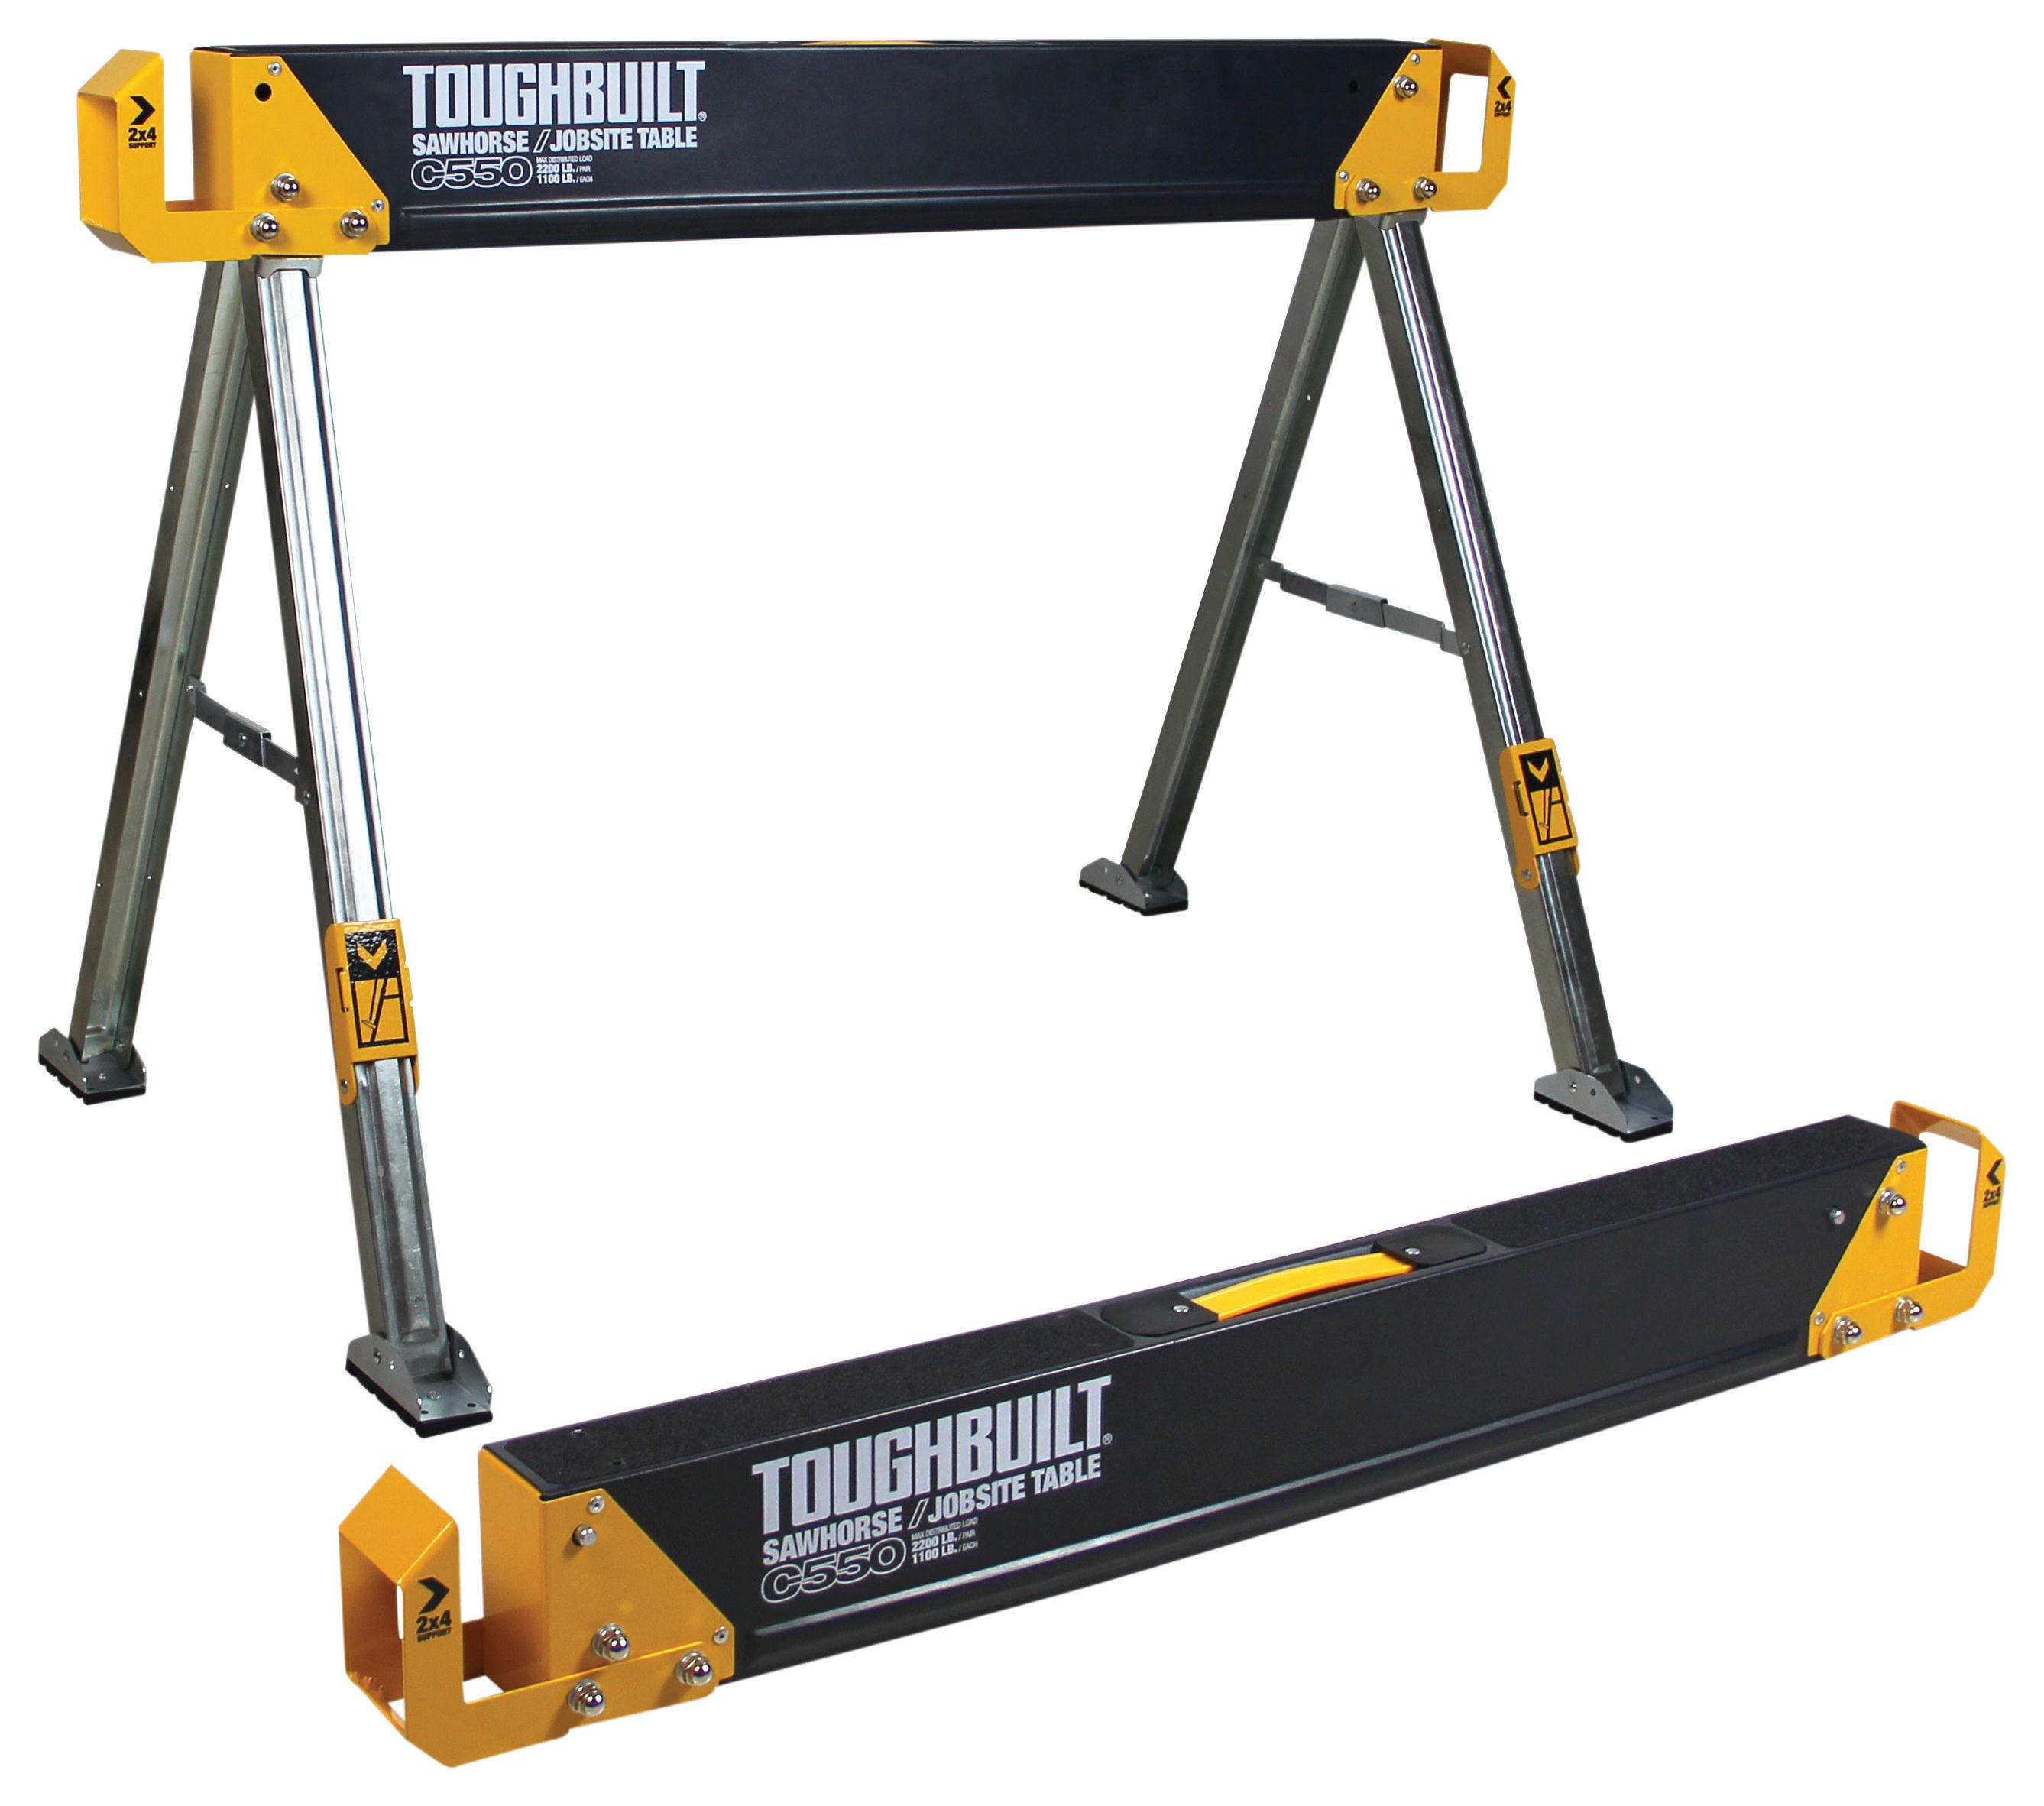 Toughbuilt C550-2 Saw Horse and Jobsite Table Twin Pack